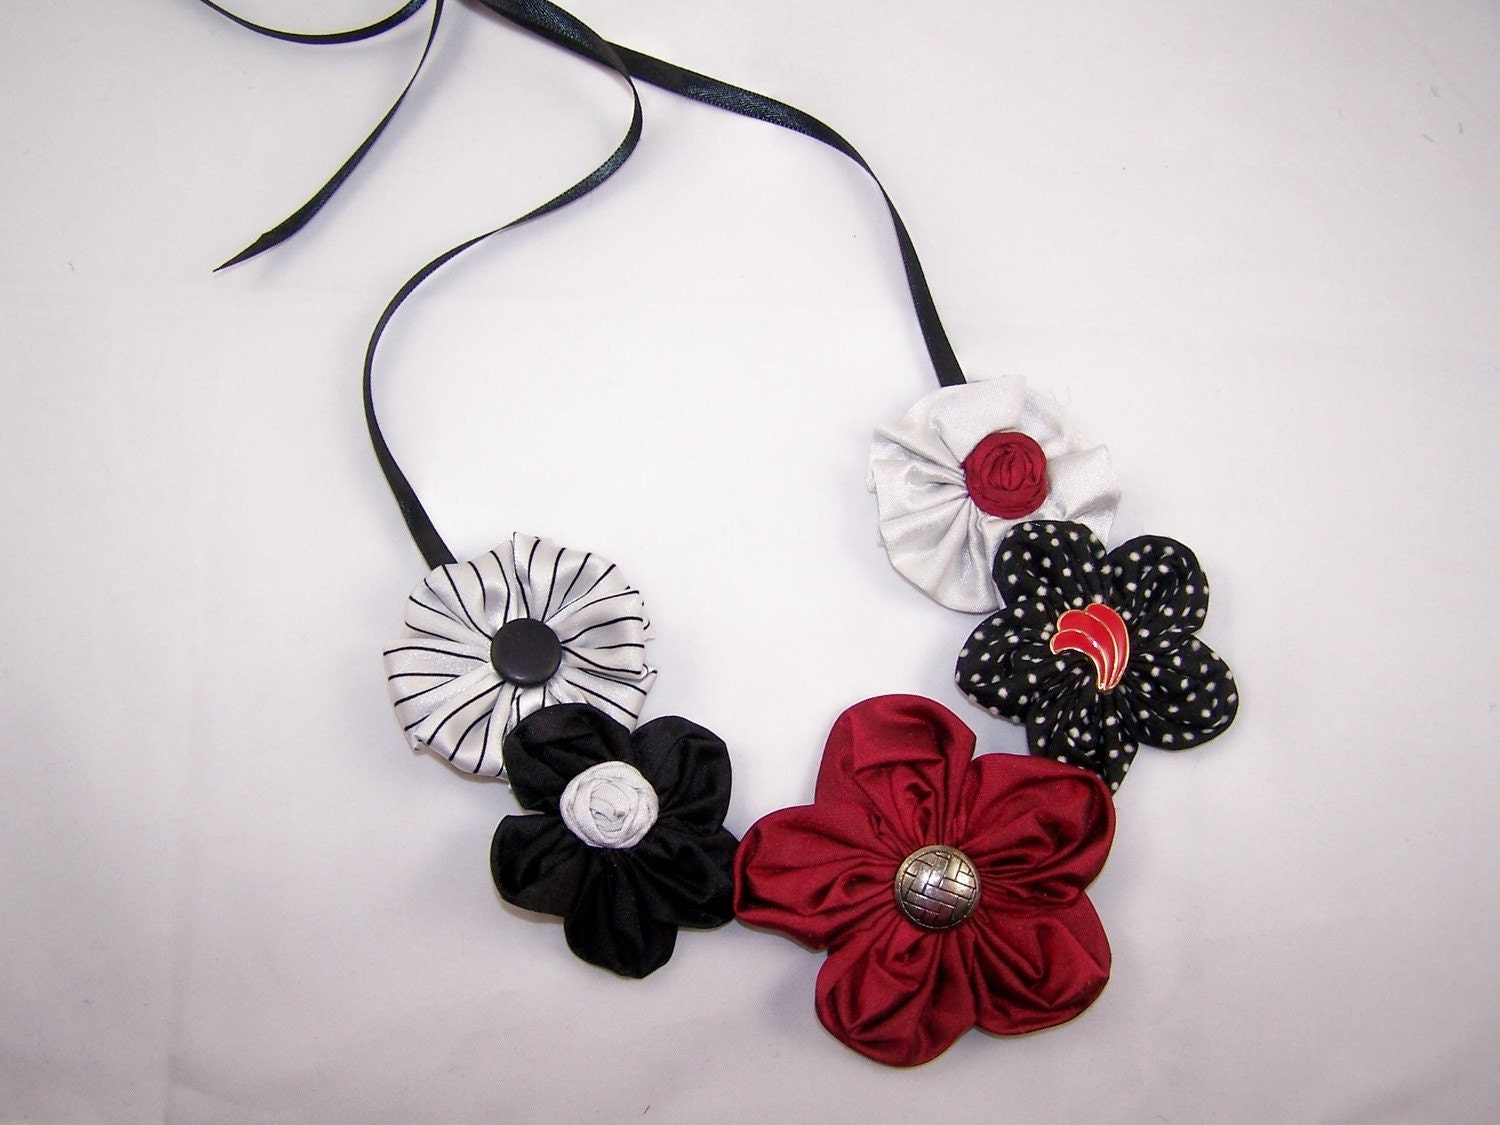 Ruby Tuesday Flower Cluster Necklace with Vintage Earrings and Buttons